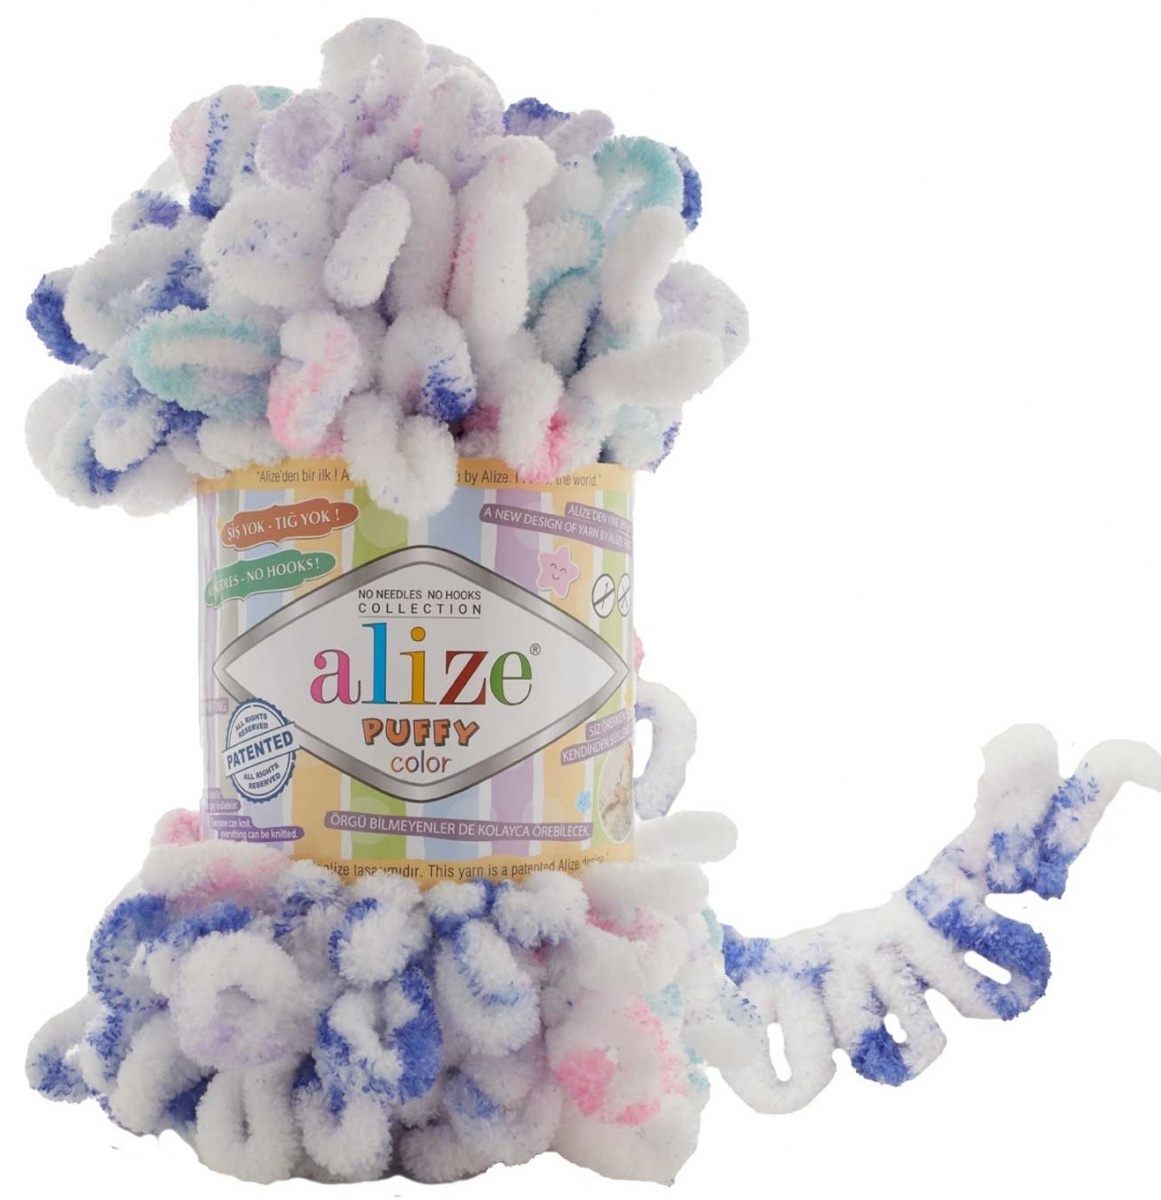 Alize Puffy Color, 100% Micropolyester 5 Skein Value Pack, 500g фото 42